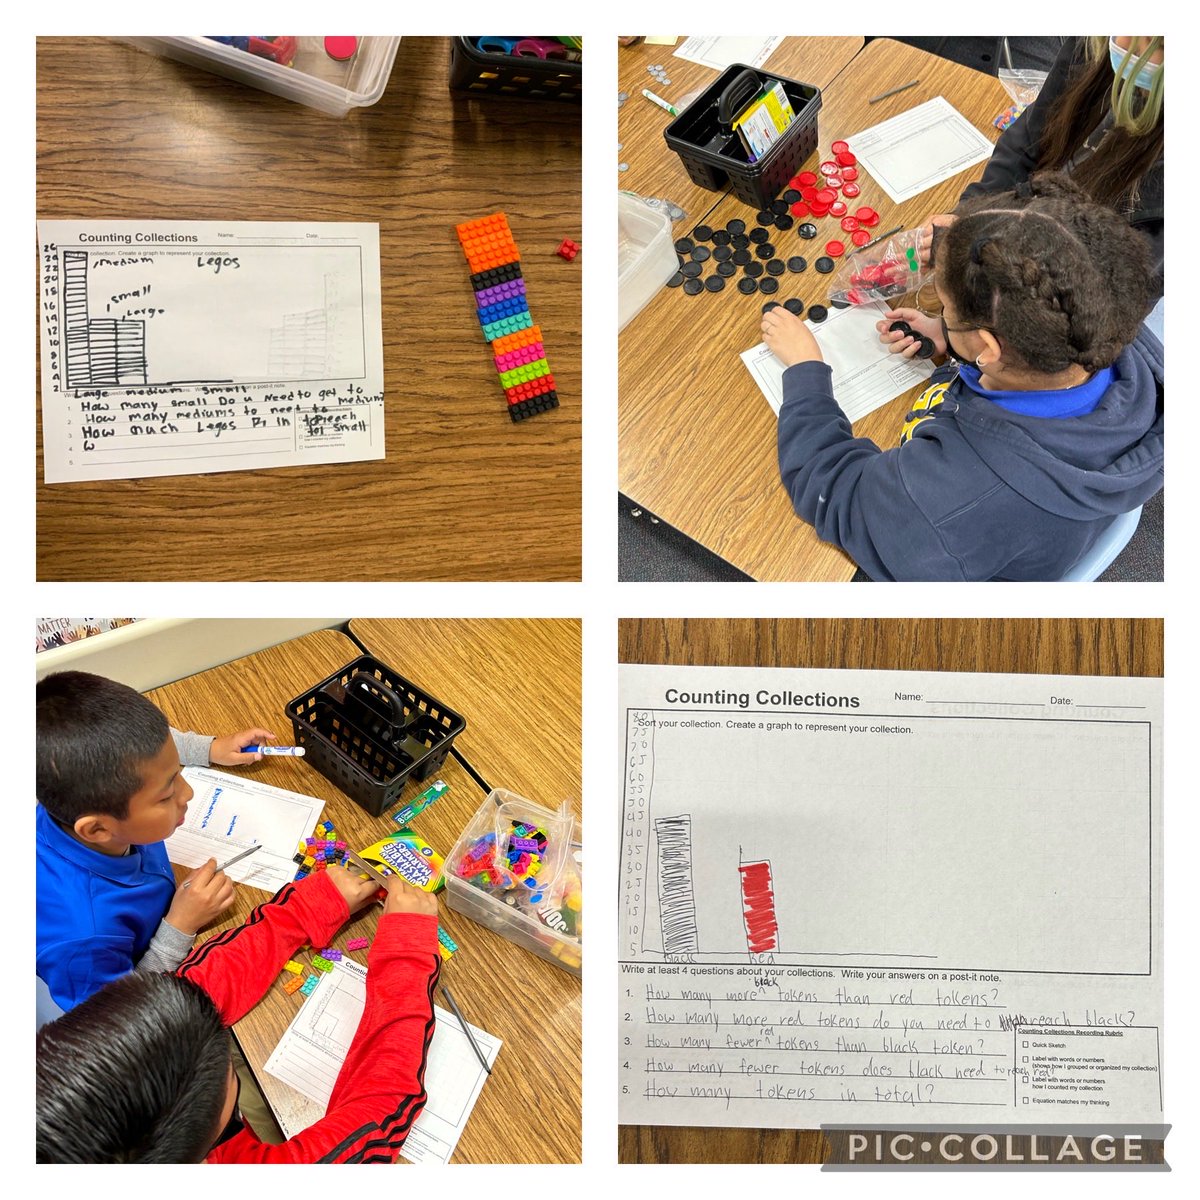 6th graders ⁦@YorbitaCheetah⁩ along with the guidance of our instructional coach are developing a mathematical model utilizing a “collection of items” that allows them to answer their own mathematical questions. ⁦@RowlandSchools⁩ #WeAreRUSD #countingcollections